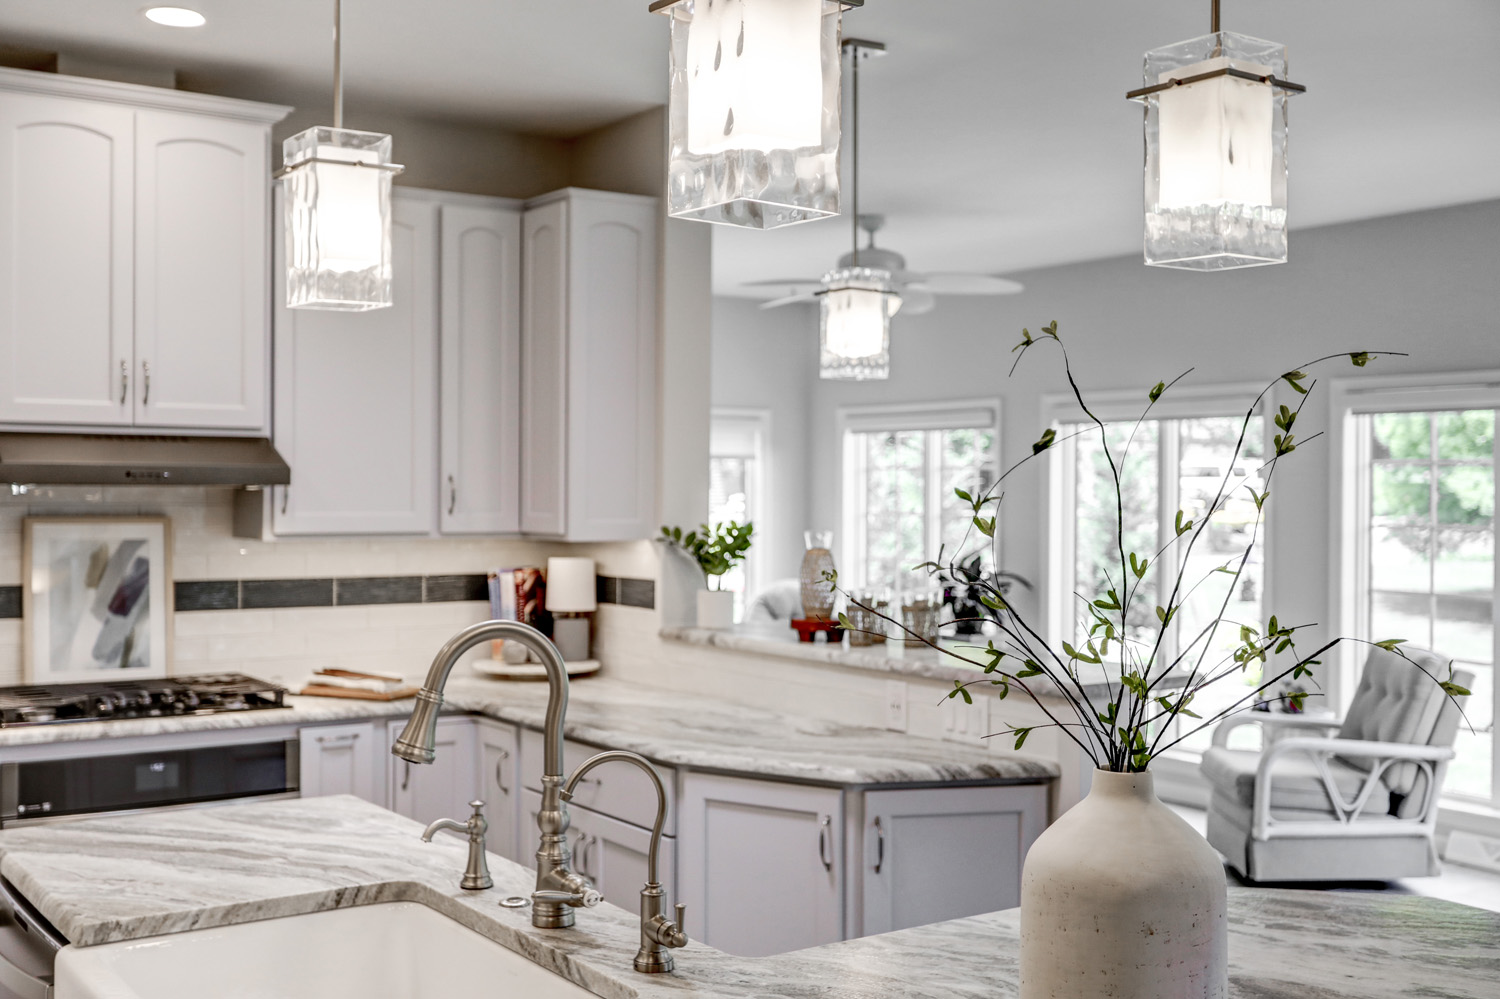 Conestoga Valley Kitchen Remodel with satin nickel faucet and pendant lighting